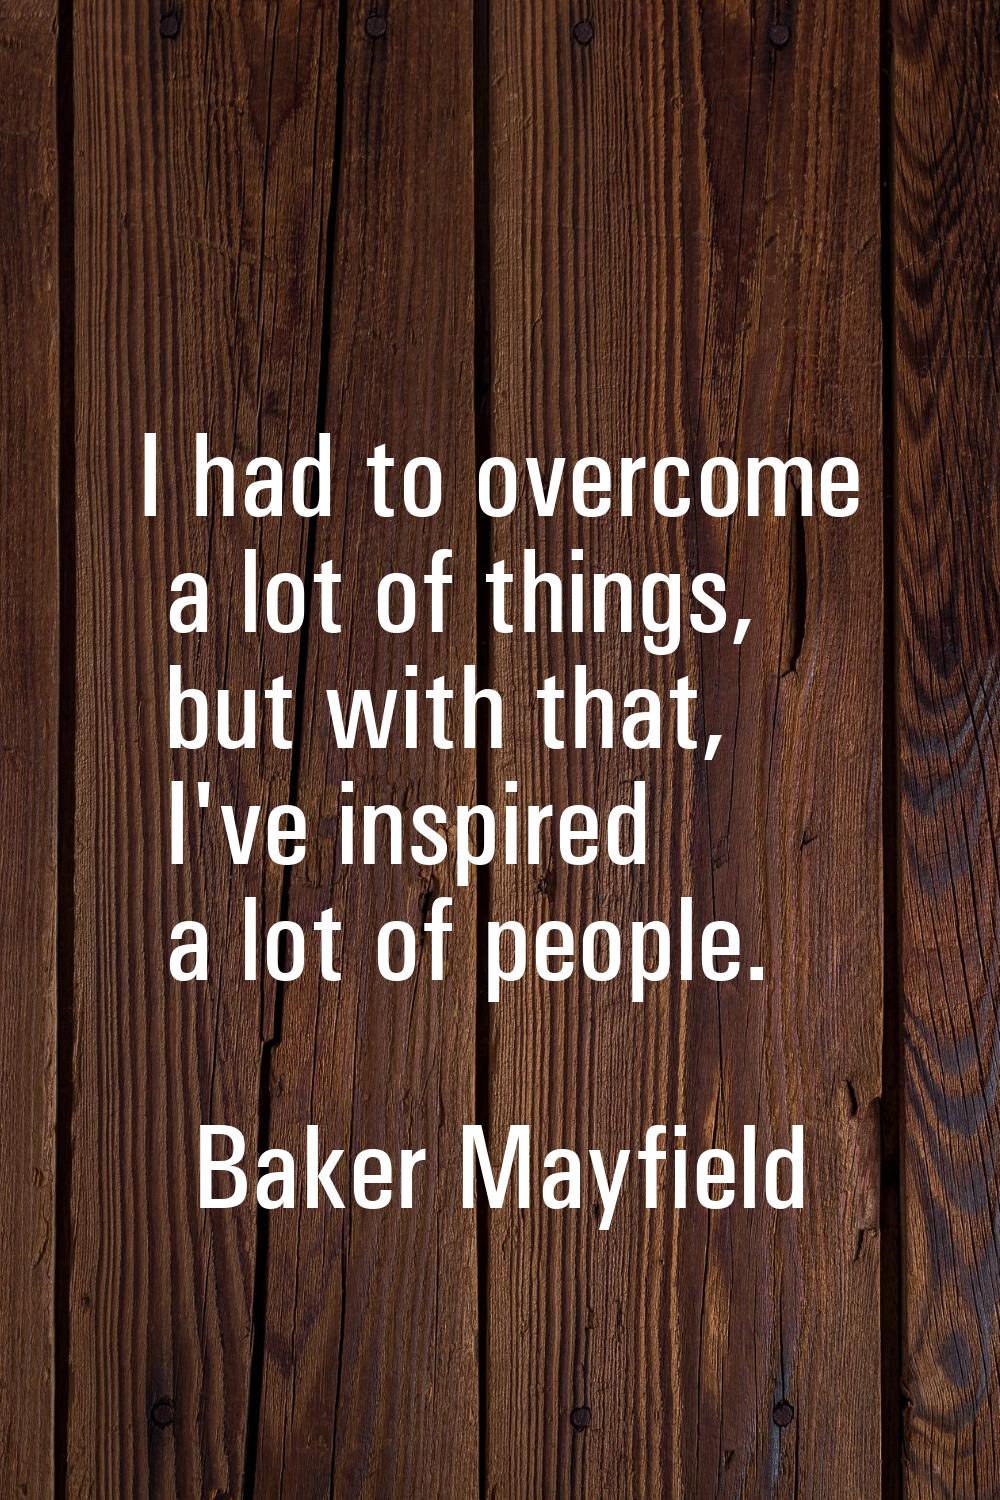 I had to overcome a lot of things, but with that, I've inspired a lot of people.